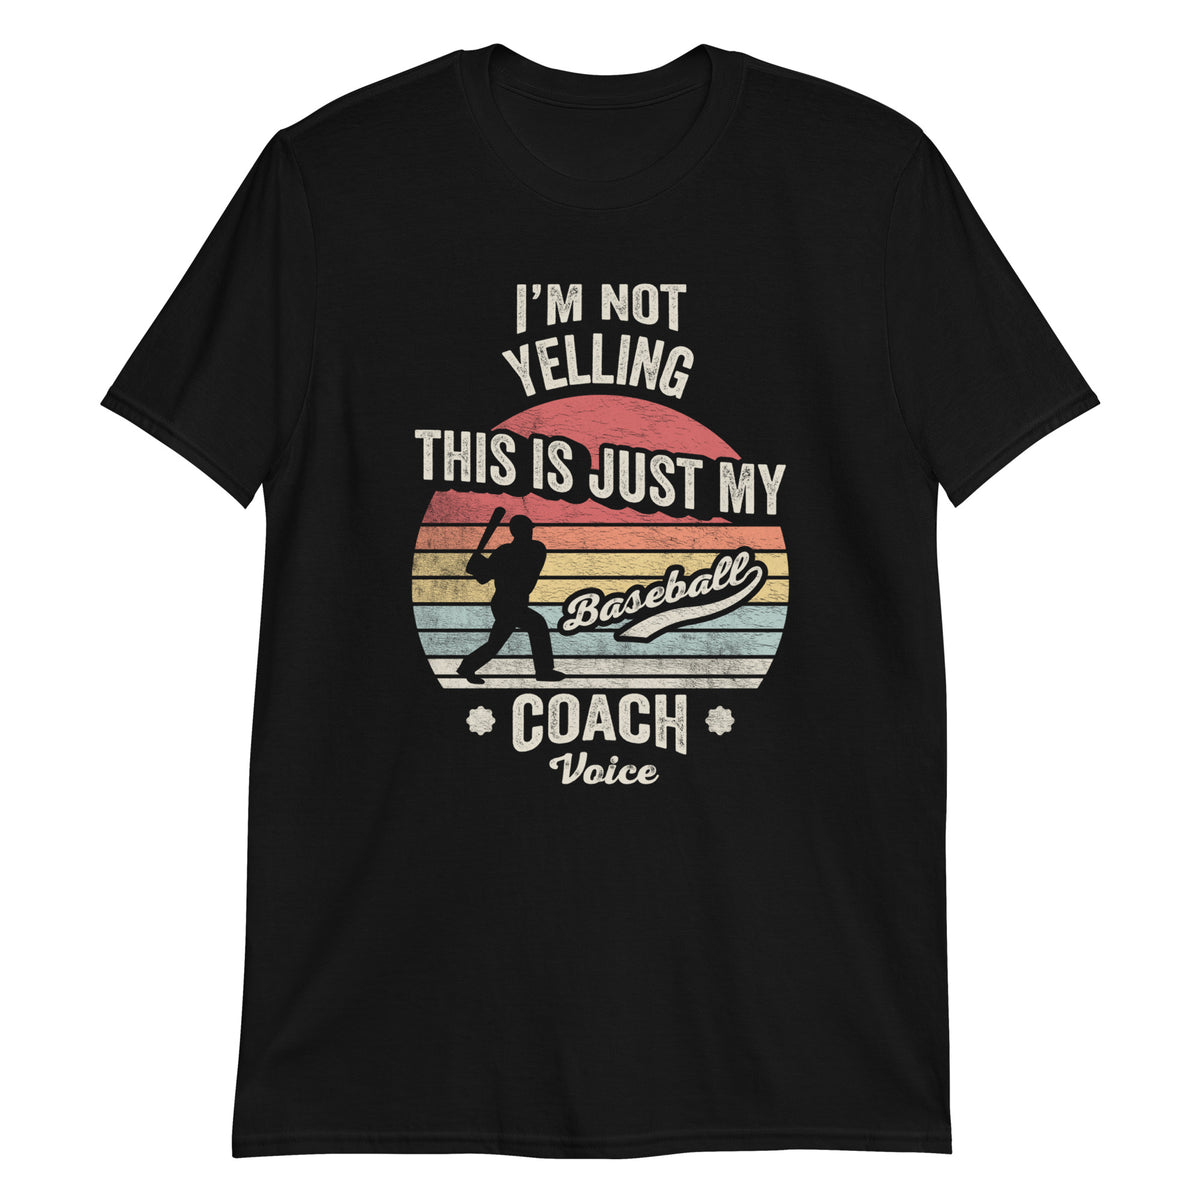 I'm not Yelling This is Just My Baseball Coach Voice T-Shirt